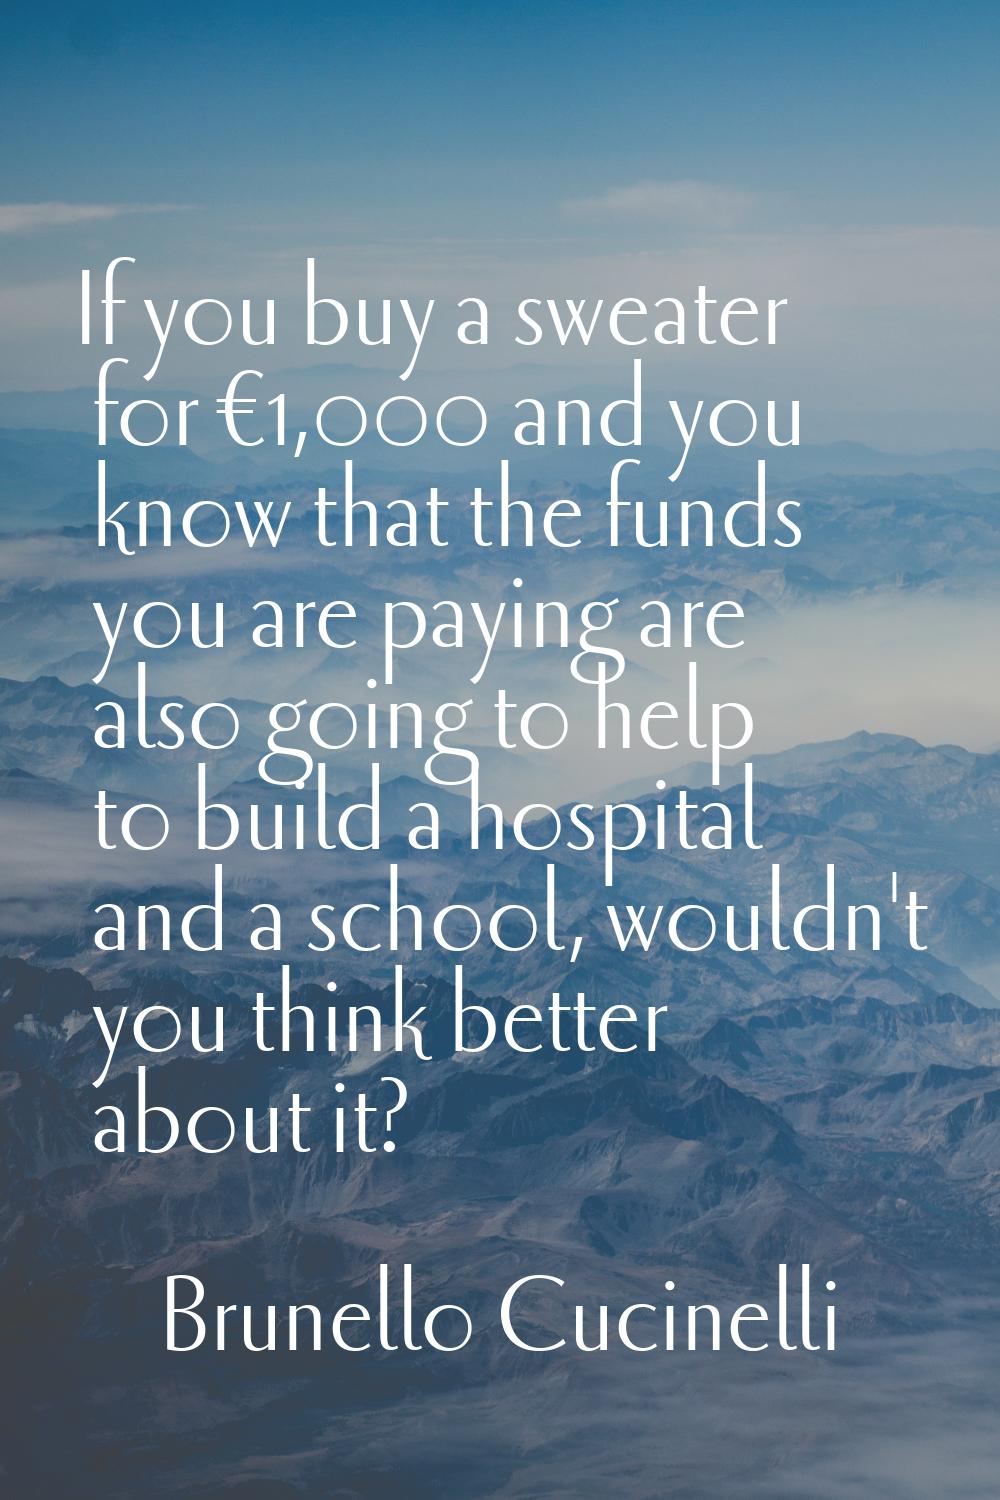 If you buy a sweater for €1,000 and you know that the funds you are paying are also going to help t